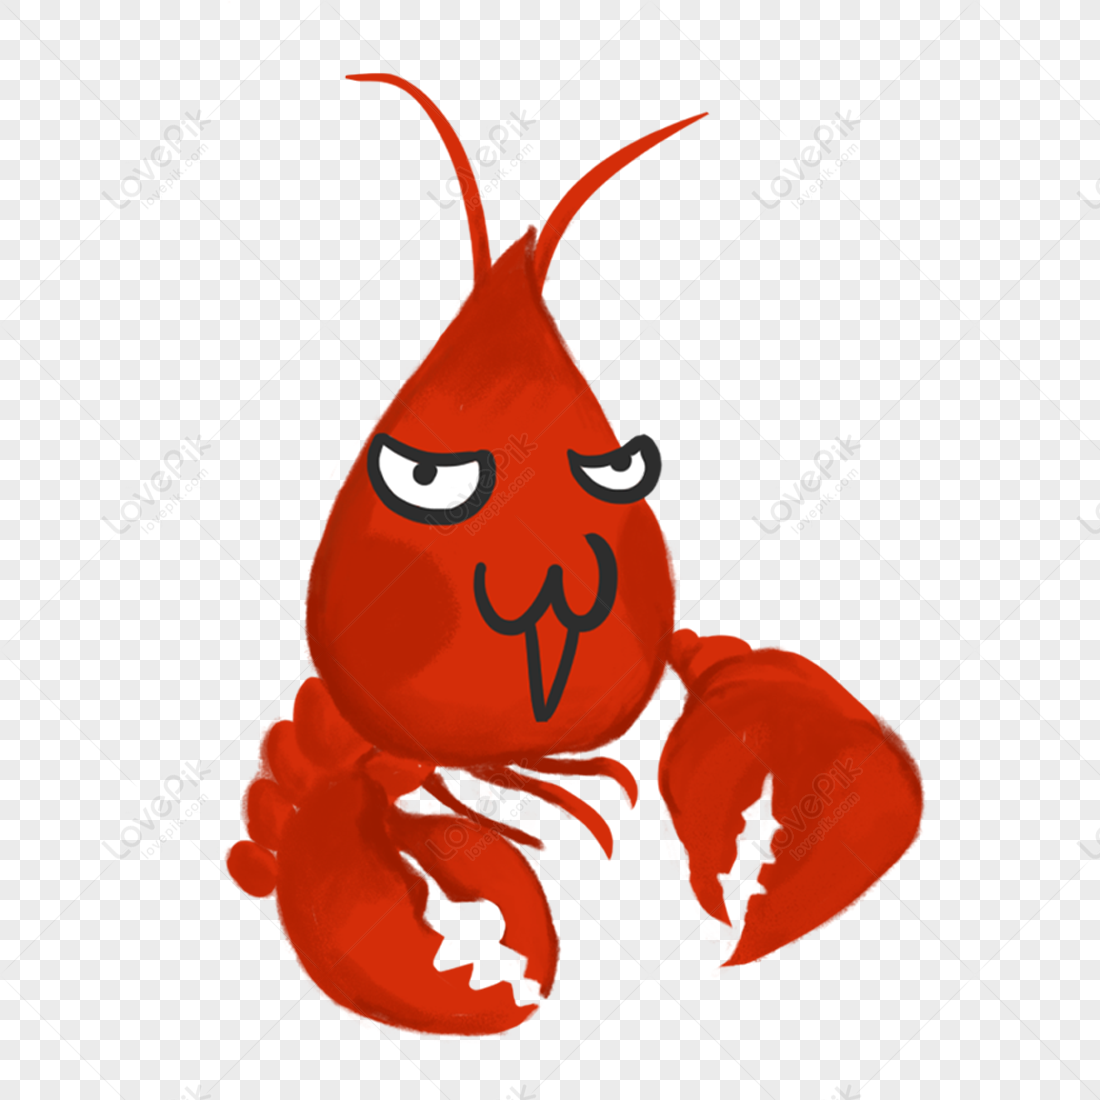 Cartoon Lobster Free PNG And Clipart Image For Free Download - Lovepik |  400210279